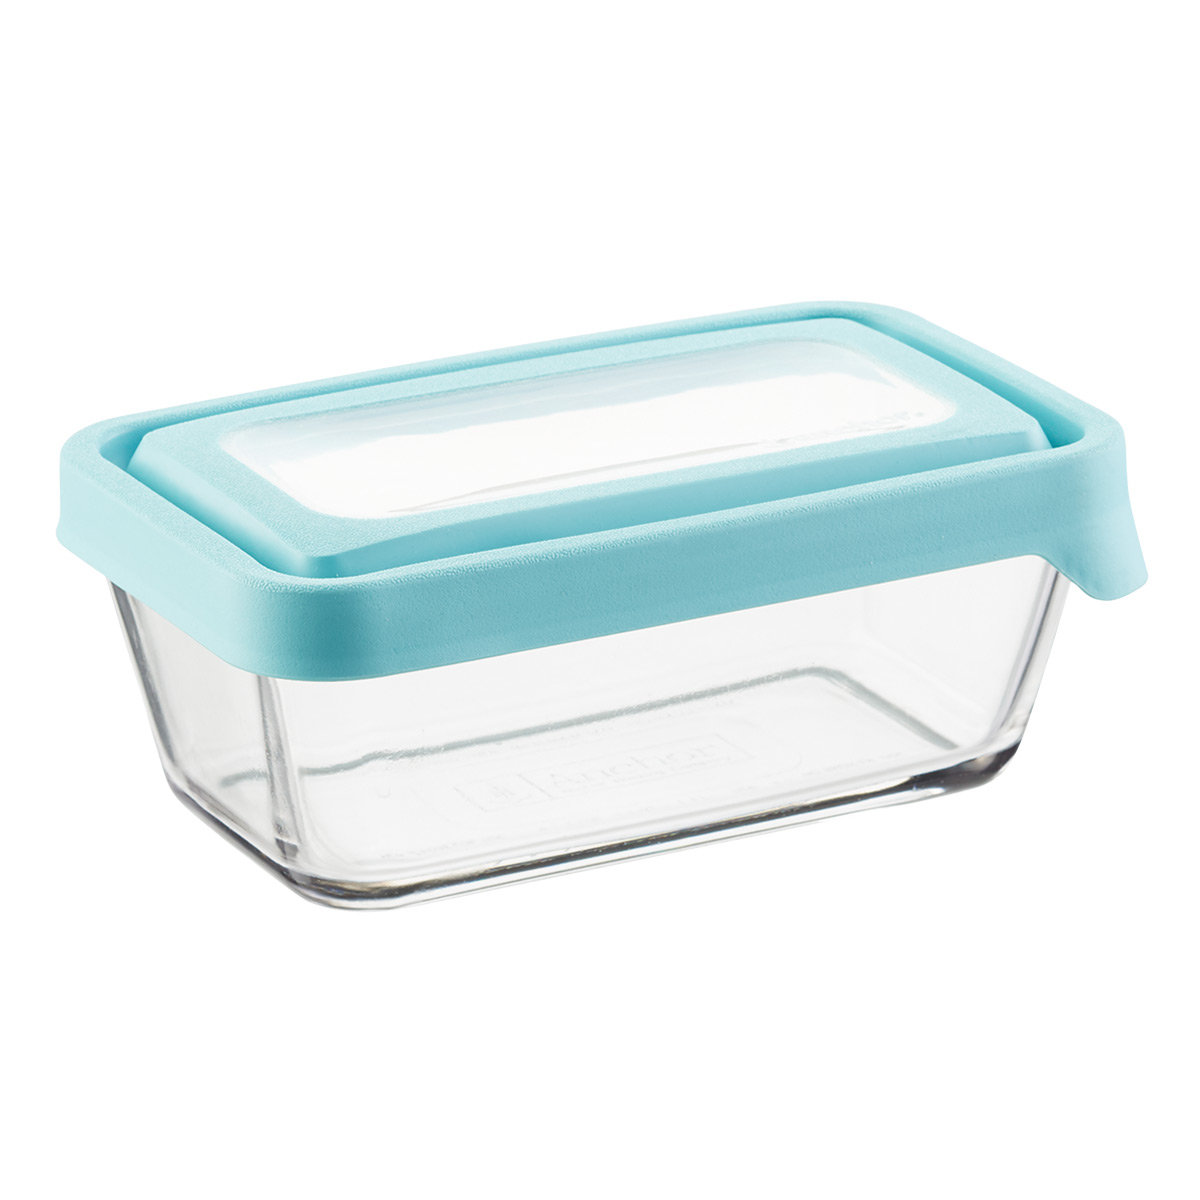 https://www.containerstore.com/catalogimages/351281/10076232-anchor-trueseal-container-r.jpg